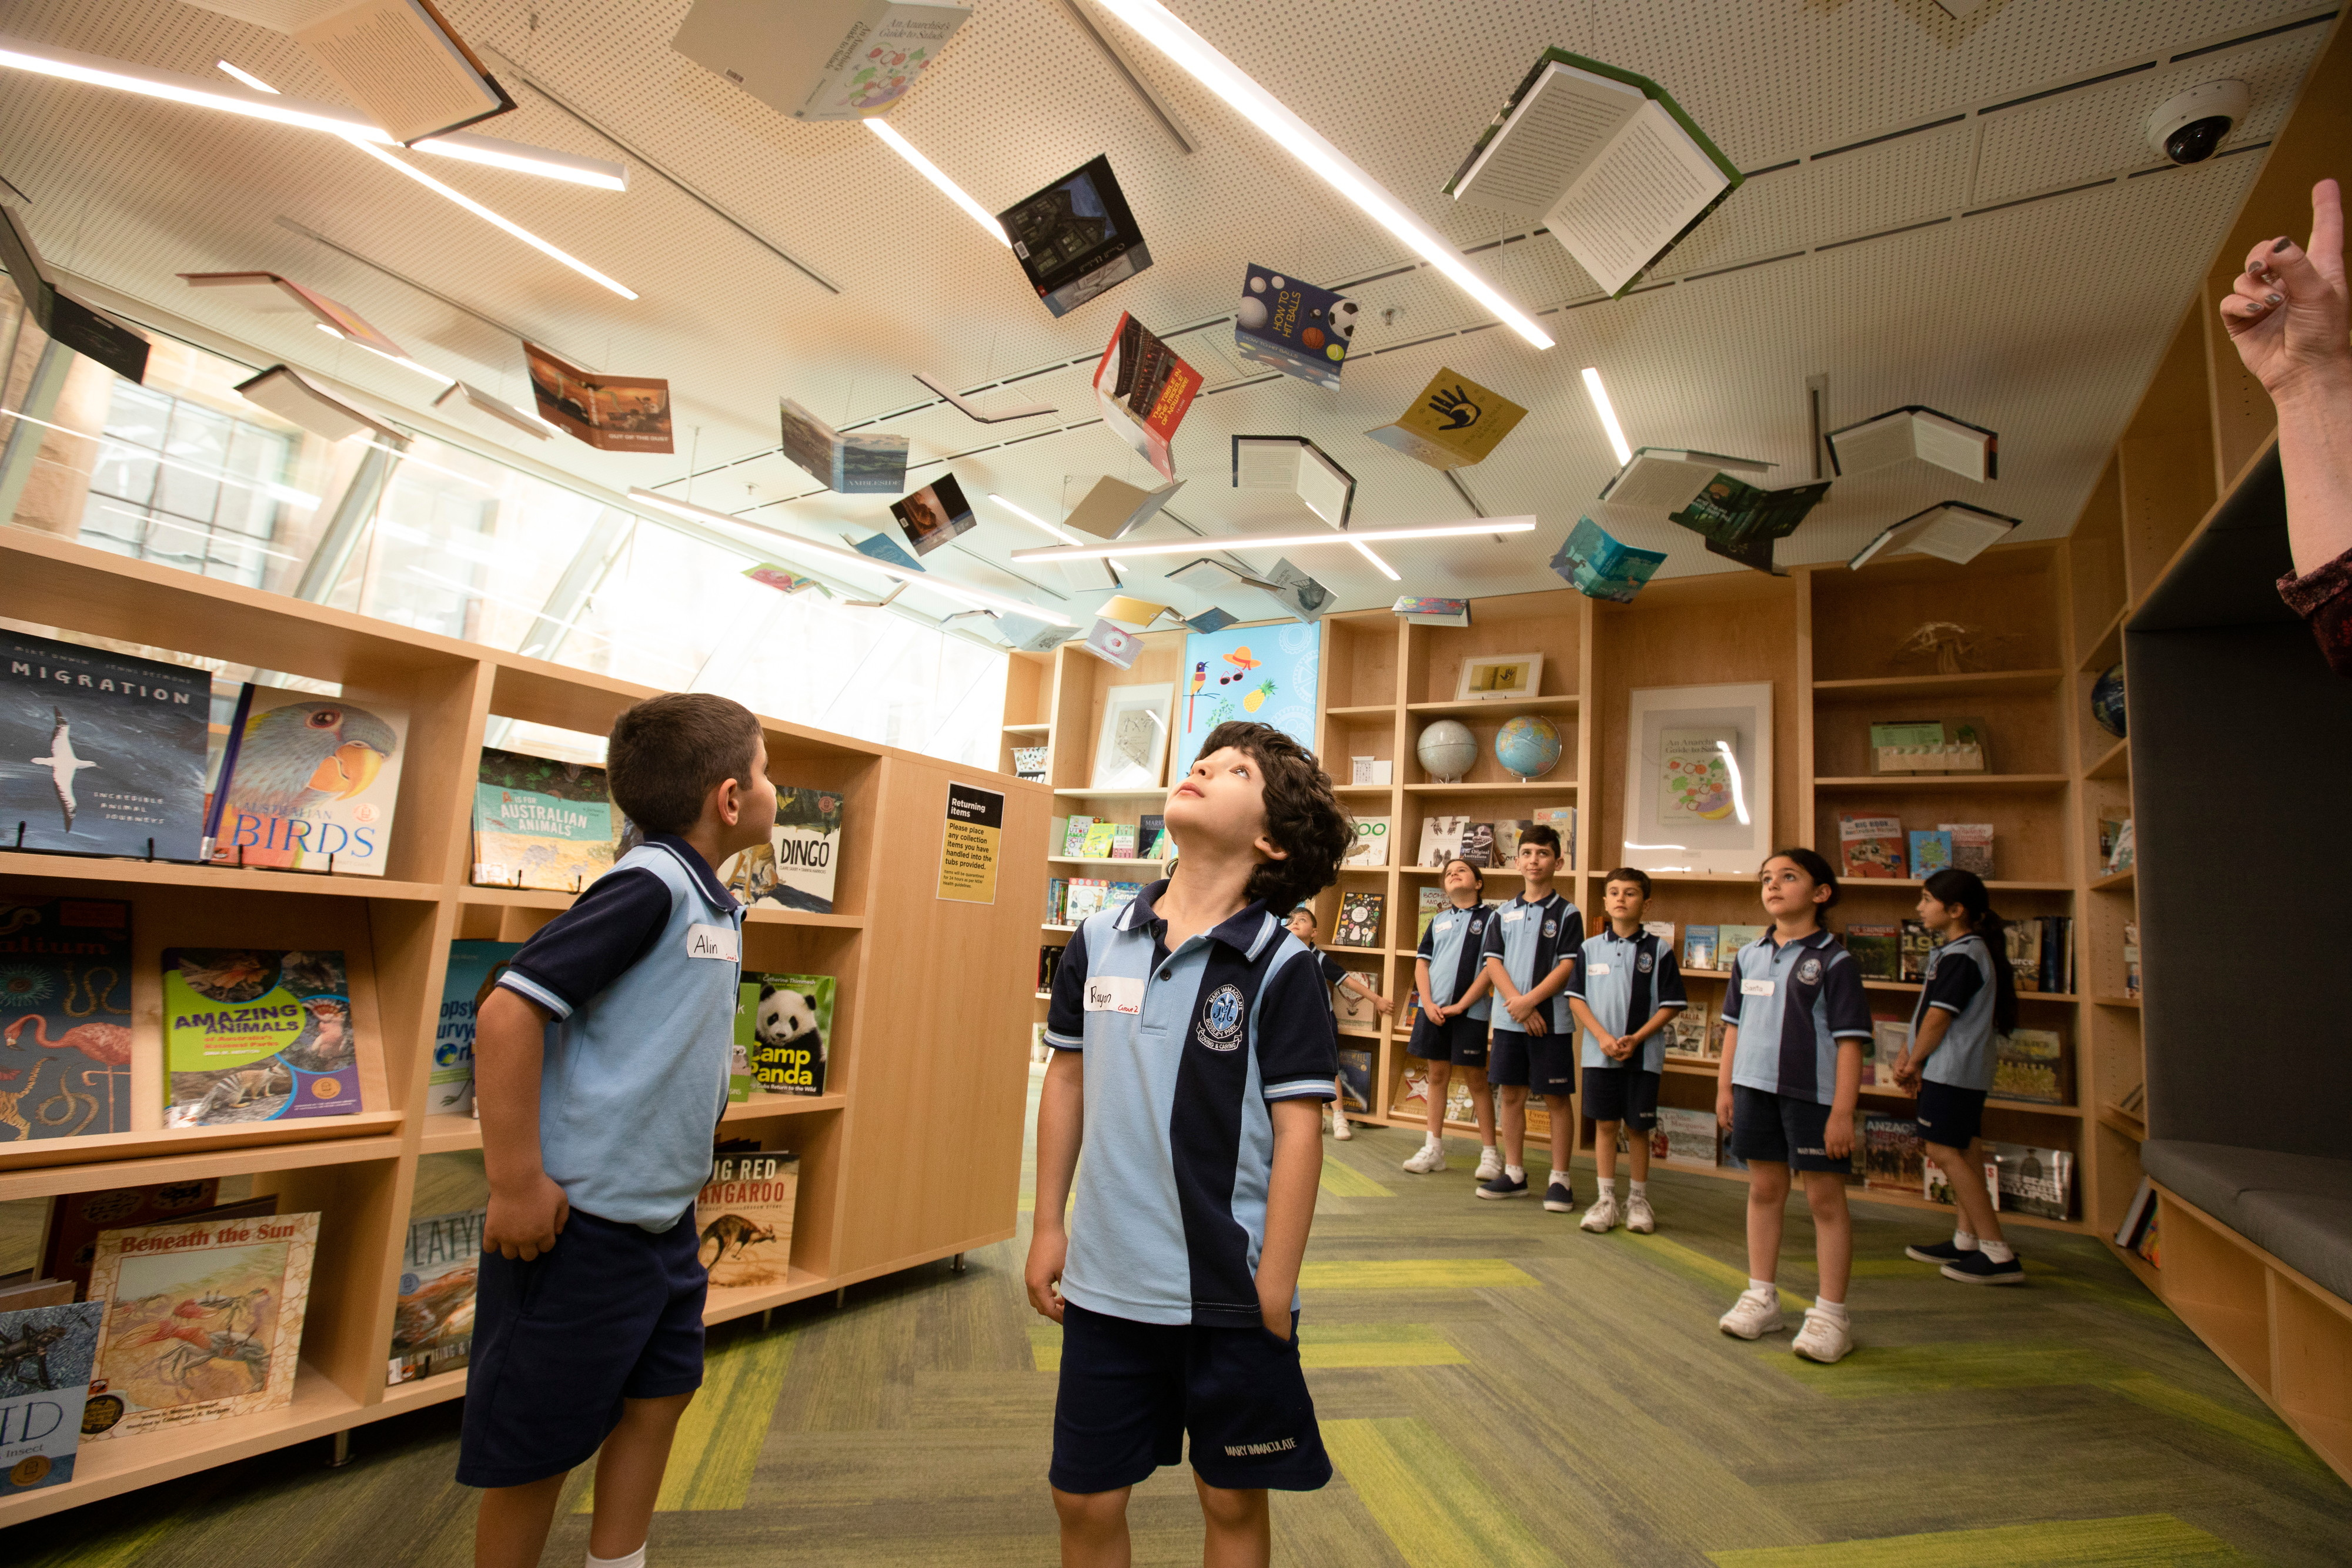 Students look up at book covers hanging from the ceiling